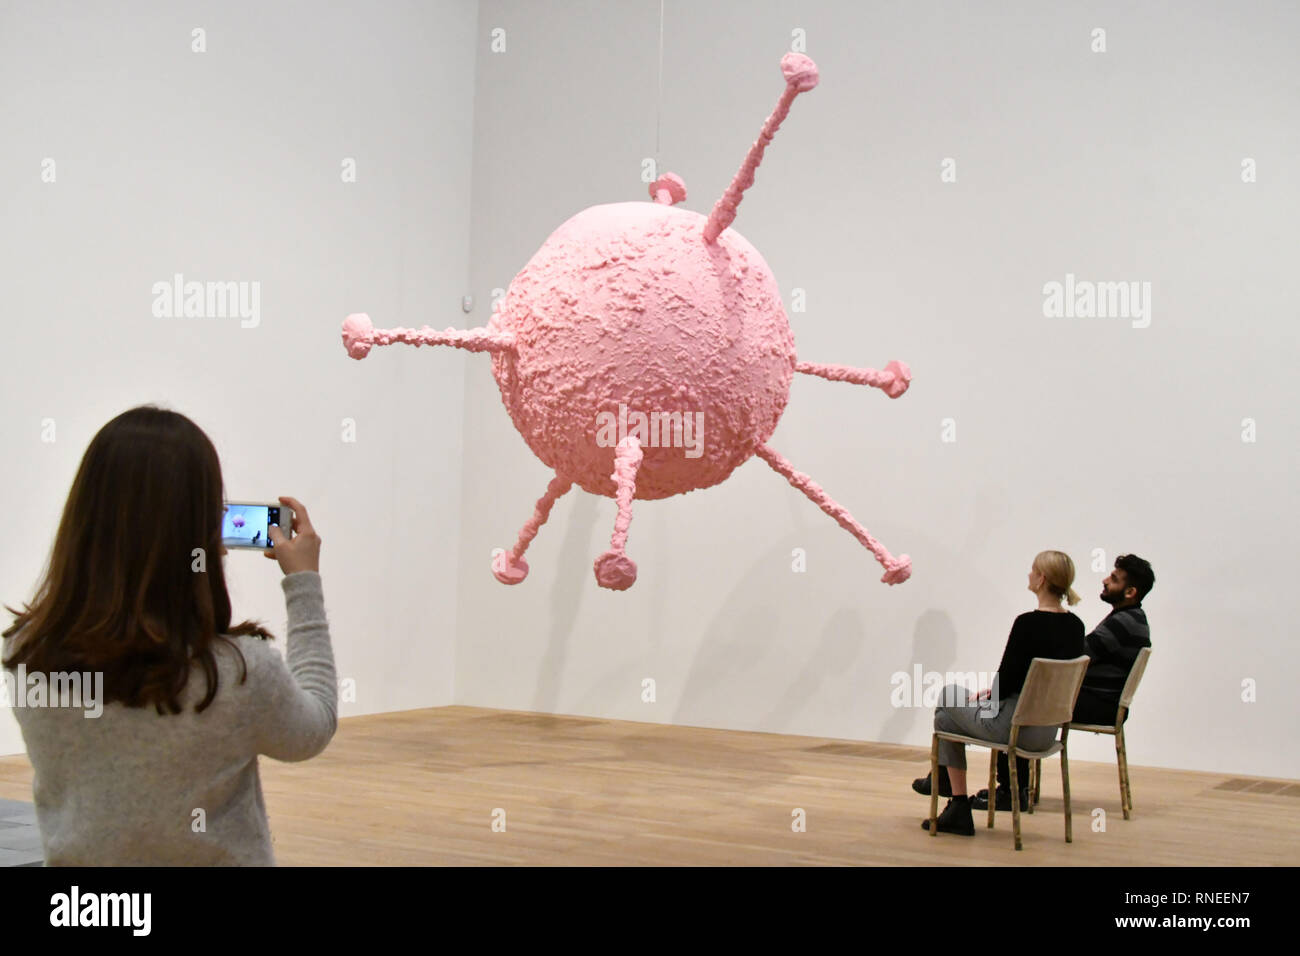 London, UK. 19th Feb, 2019. Epiphanie an Stuhlen 2011 by Franz West at Tate Modern, a major exhibition of the work of Franz West, the most extensive selection of West's abstract sculptures and furniture ever shown and the first posthumous retrospective the artist’s work ever staged in the UK. Credit: Nils Jorgensen/Alamy Live News Stock Photo